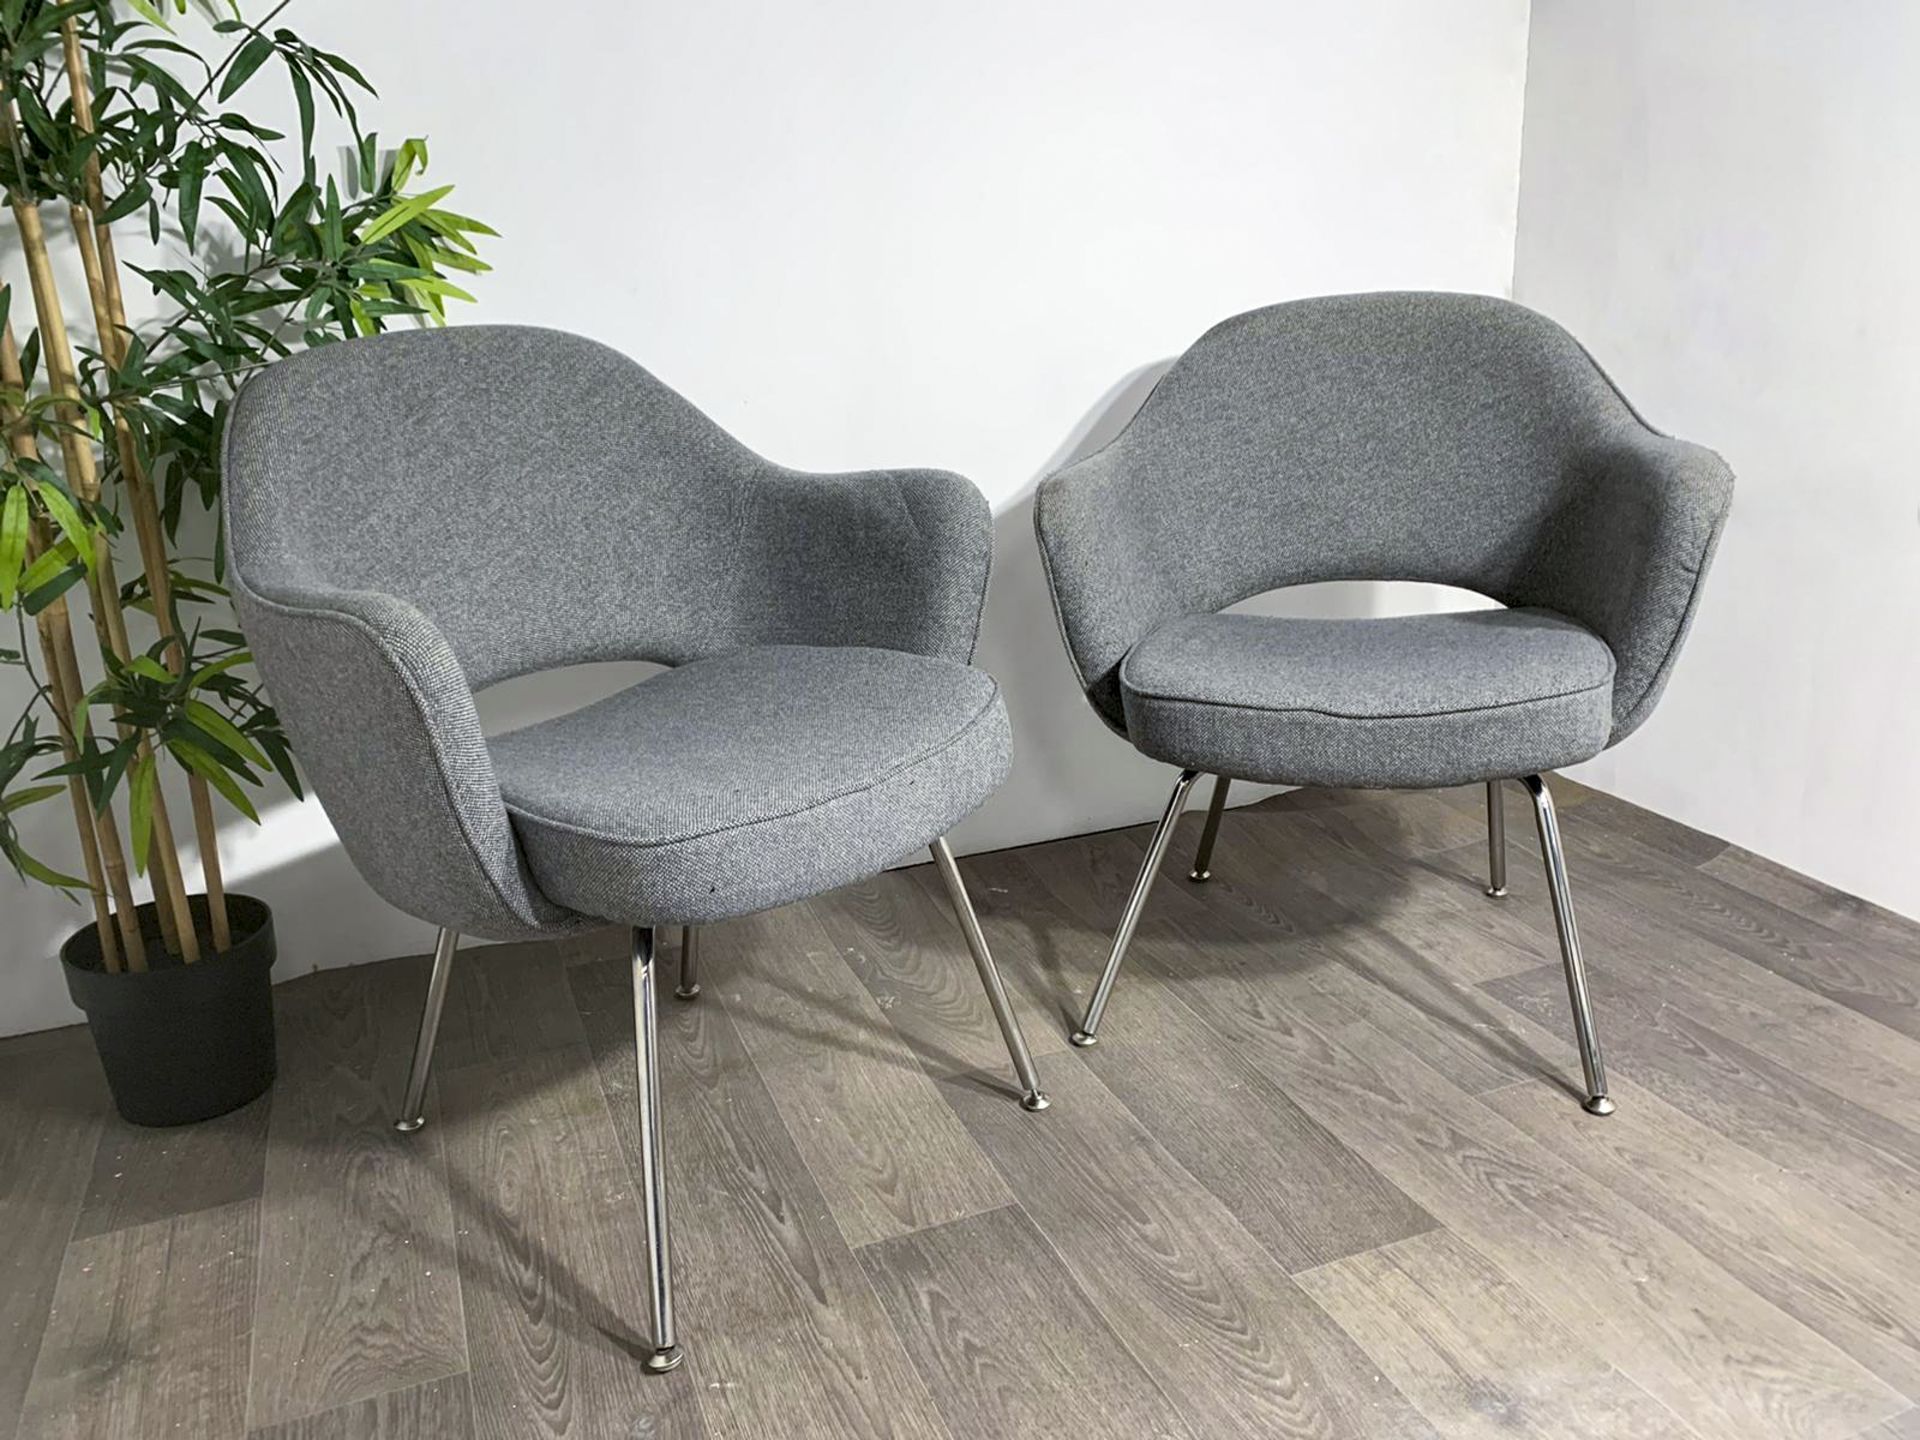 Grey Fabric Commercial Grade Chair with Chrome Legs x2 - Image 7 of 9